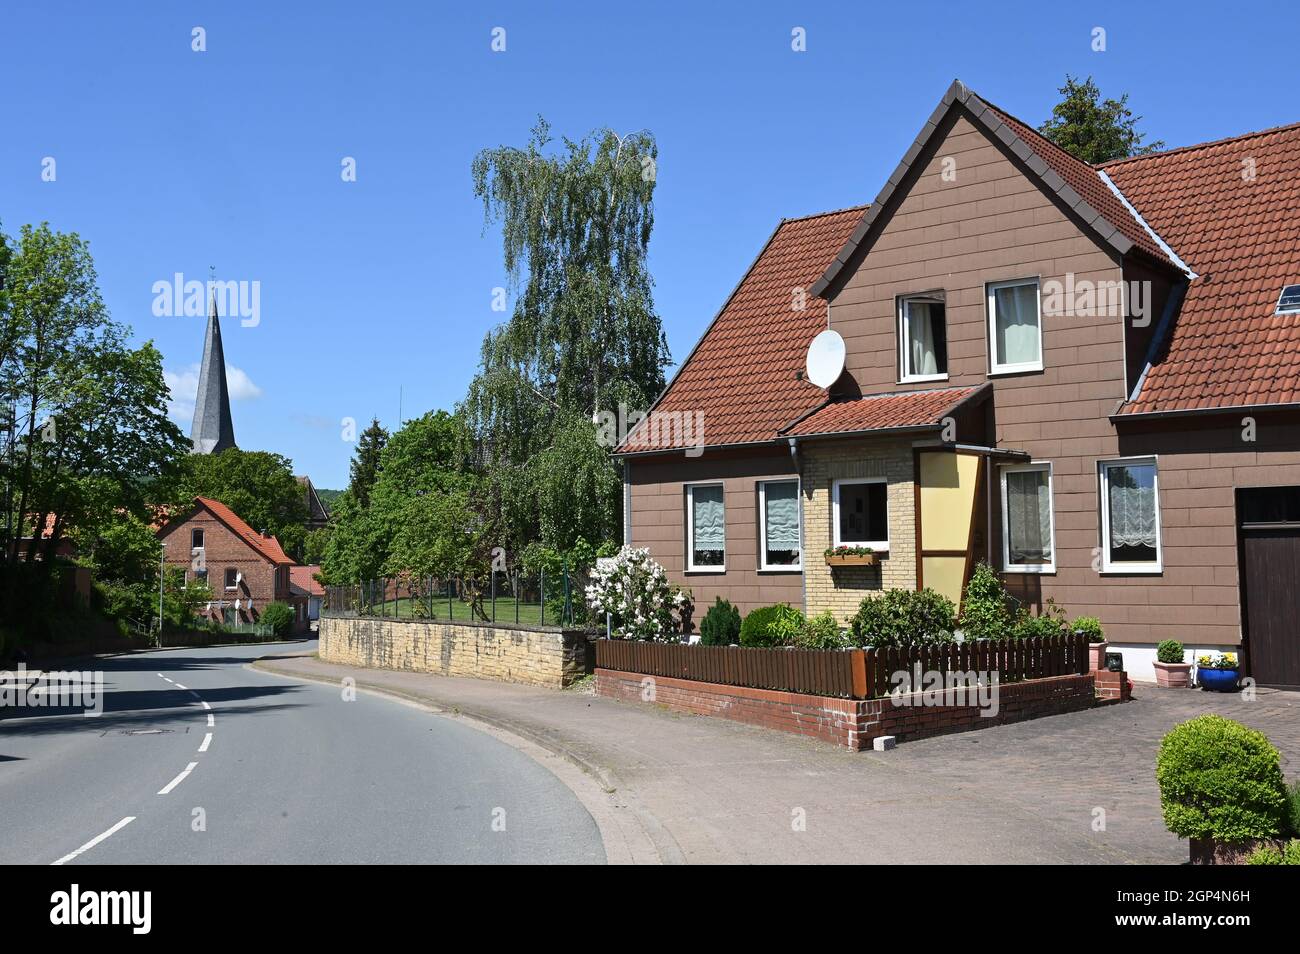 Village street in Beber with a view of the steeple of St. Magnus Church Stock Photo